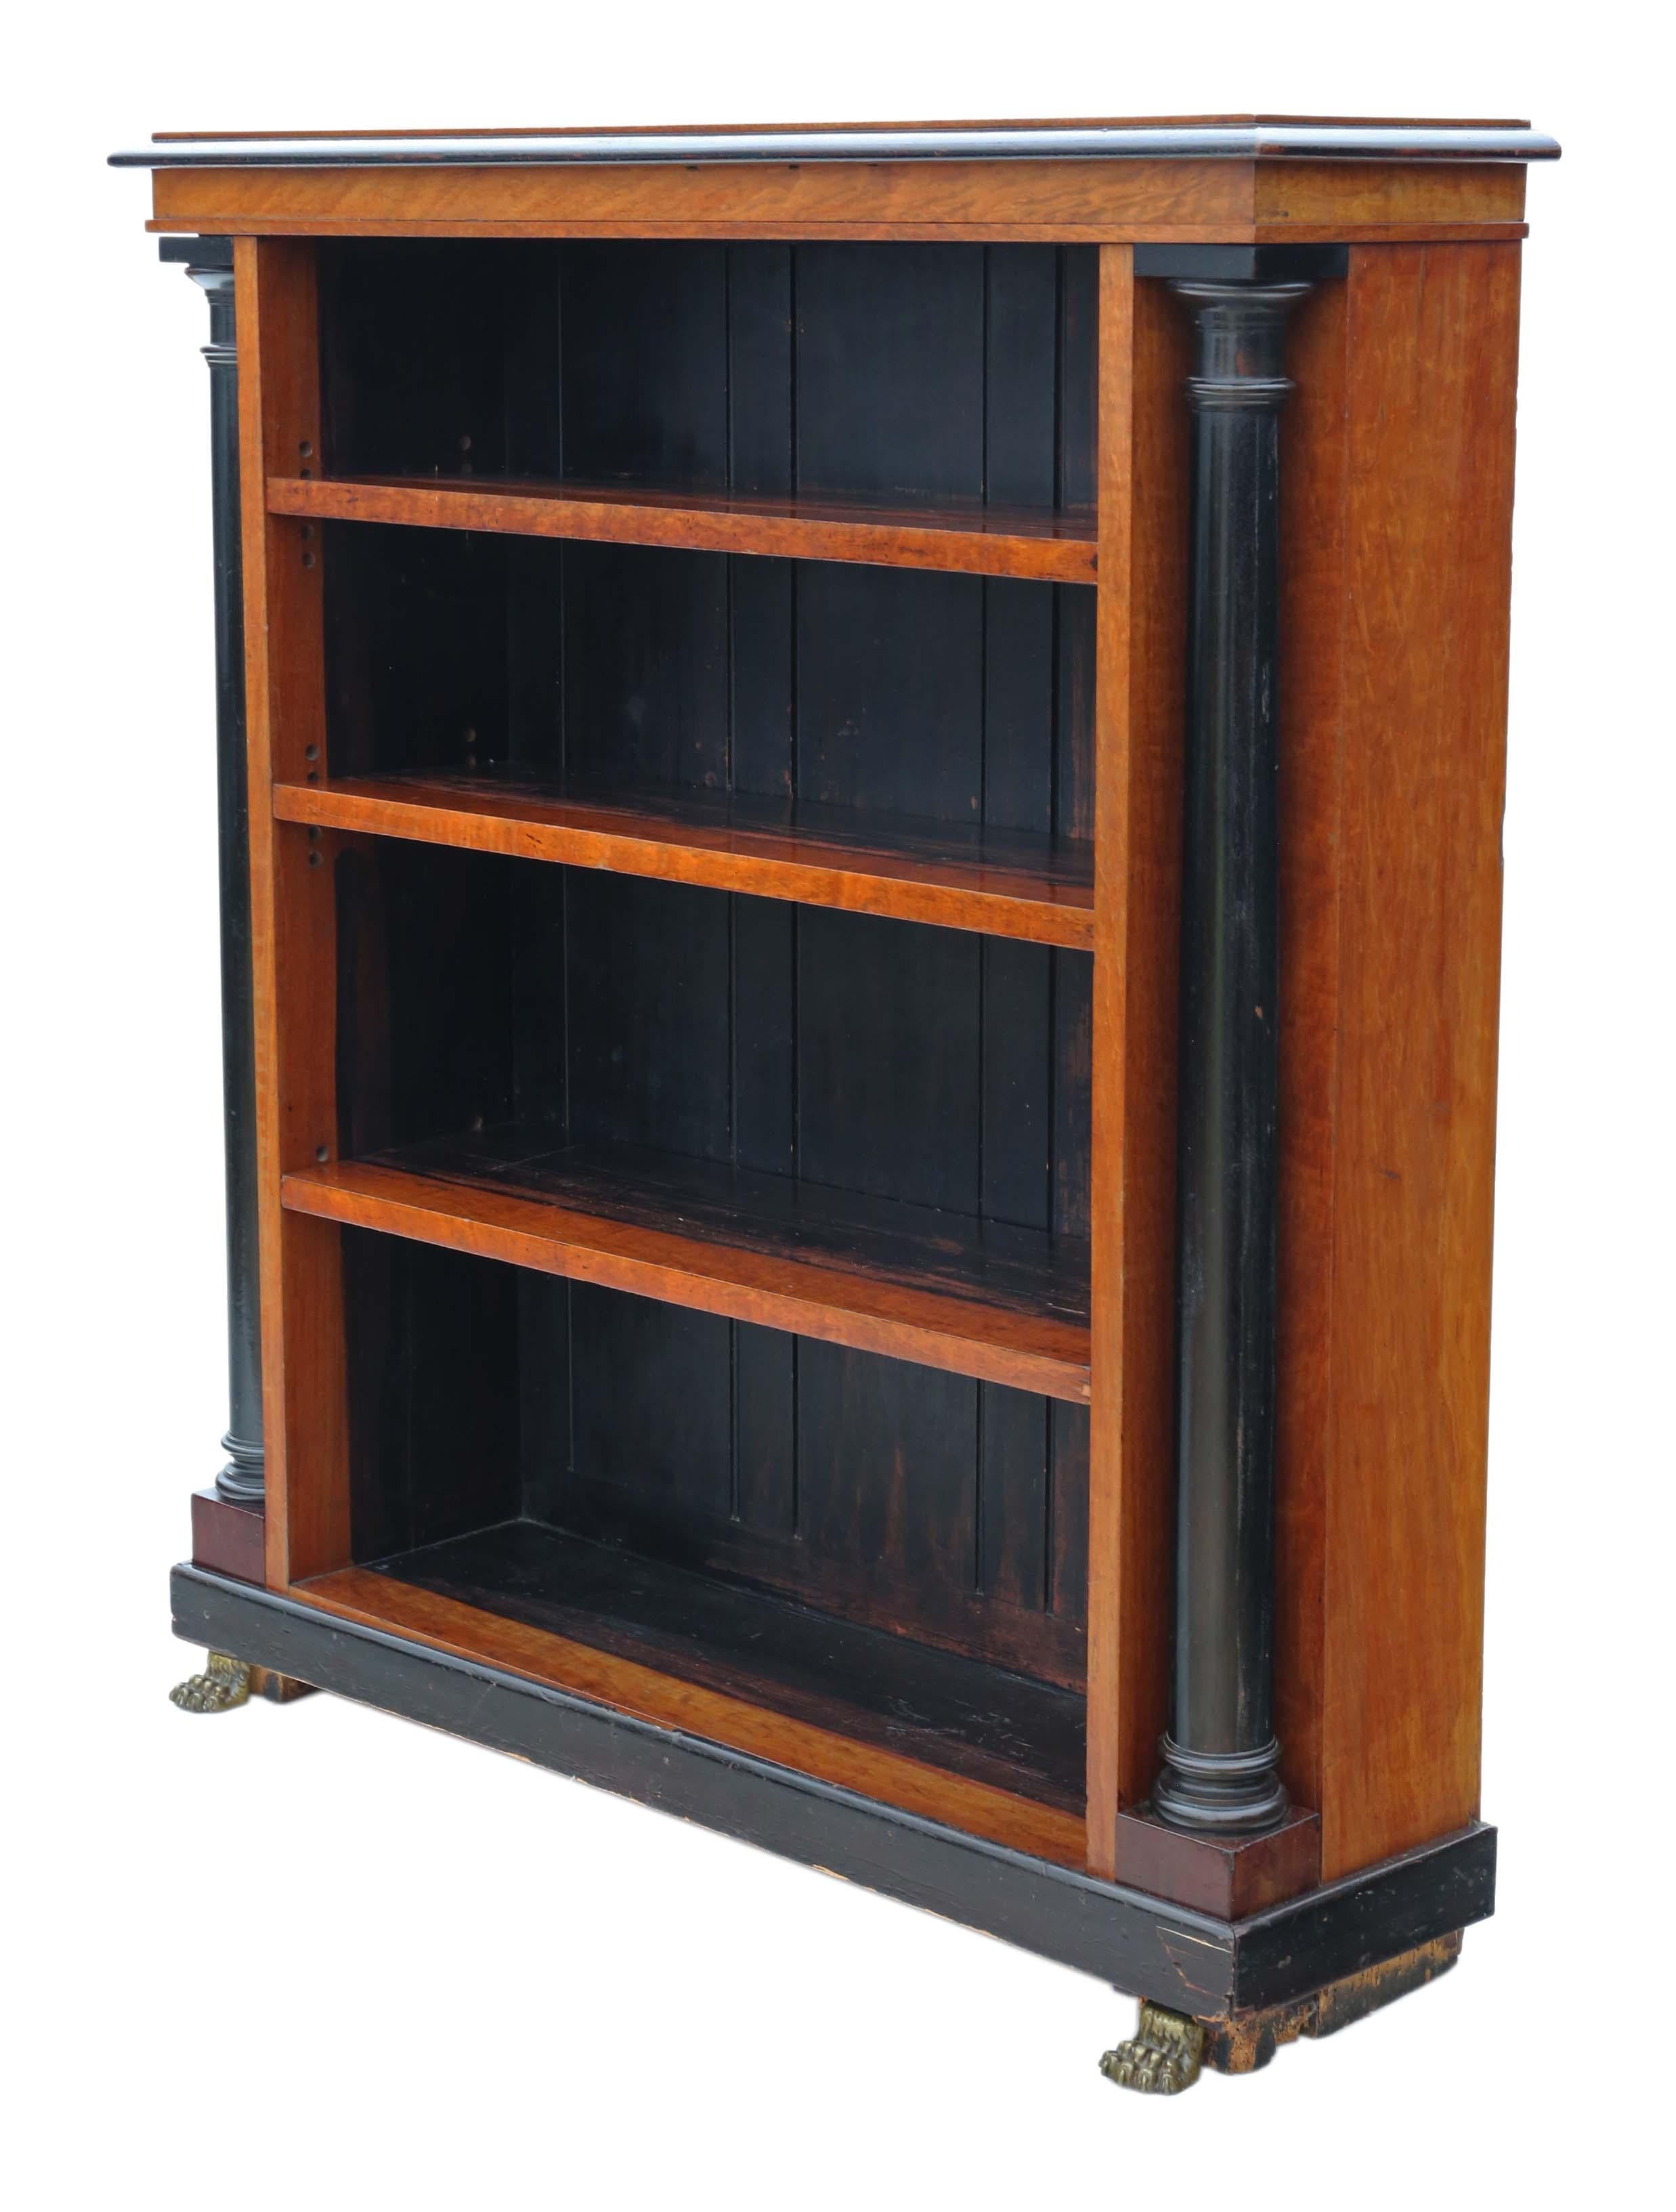 Regency or early Victorian, circa 1820-1850 and later adjustable bookcase.
This is a lovely quality item that is full of age, charm and character. A very decorative piece with amazing ray cut satin walnut and ebonised finishes. The lion's paw feet